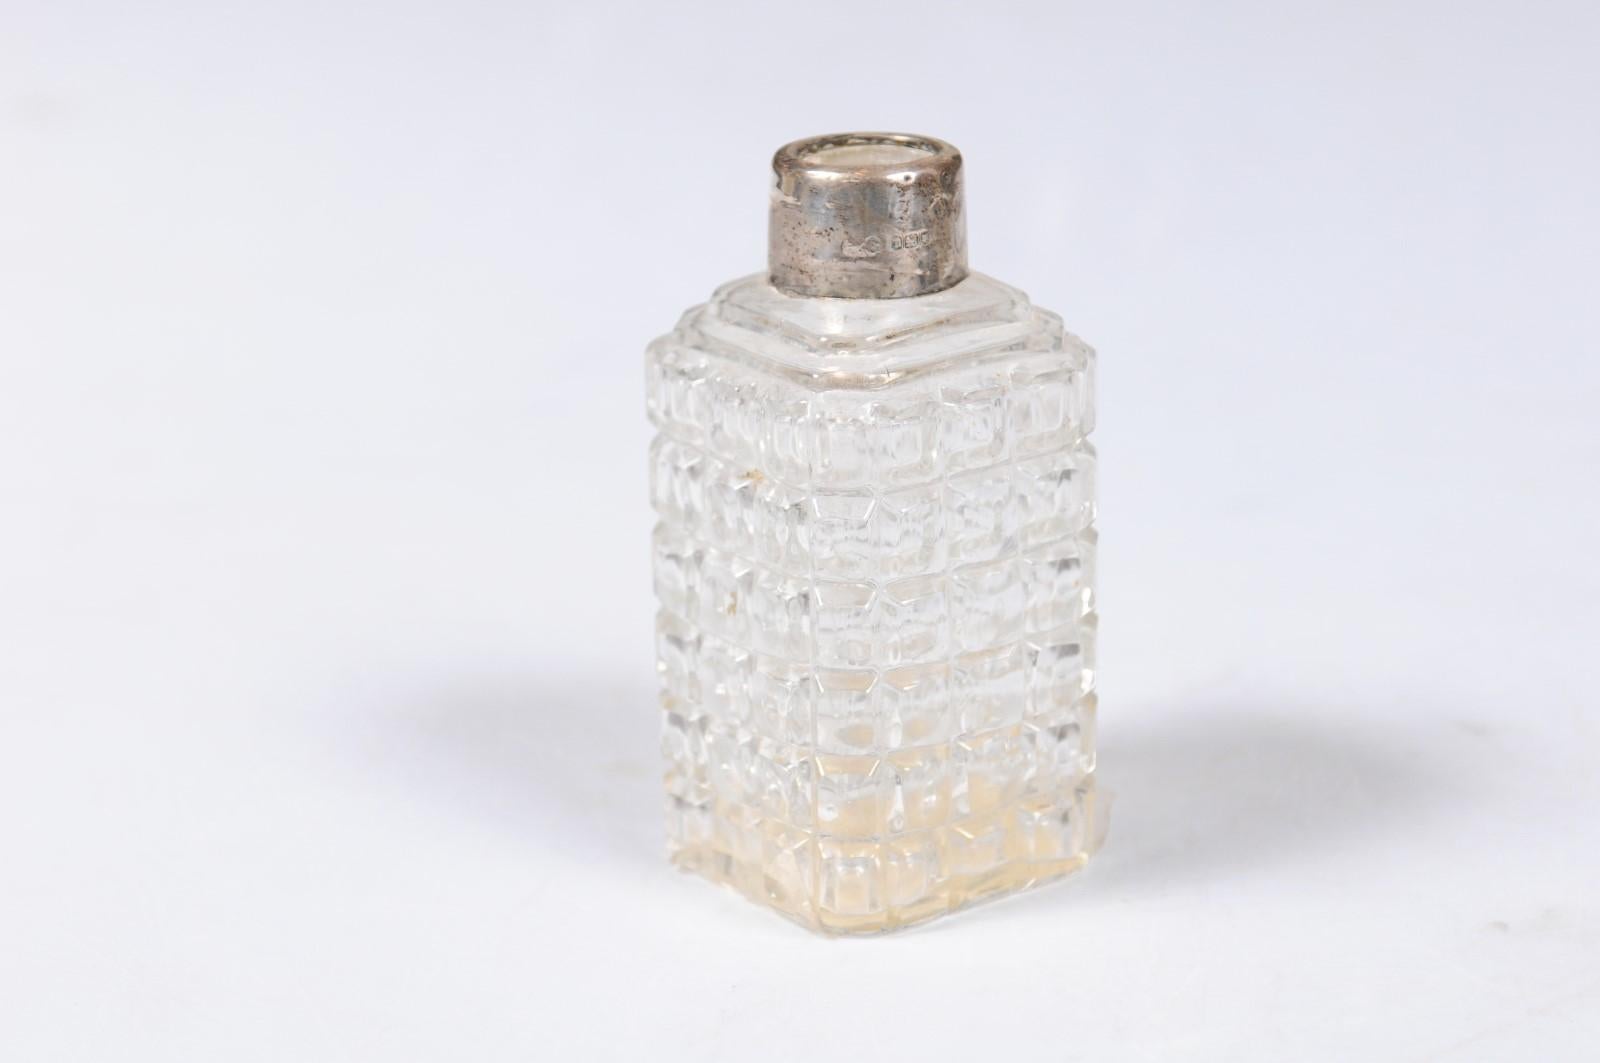 A French Napoleon III period petite crystal toiletry bottle from the mid-19th century, with silver neck. Born in France during the reign of Emperor Napoleon III, this lovely toiletry bottle features a rectangular body accented with raised motifs,